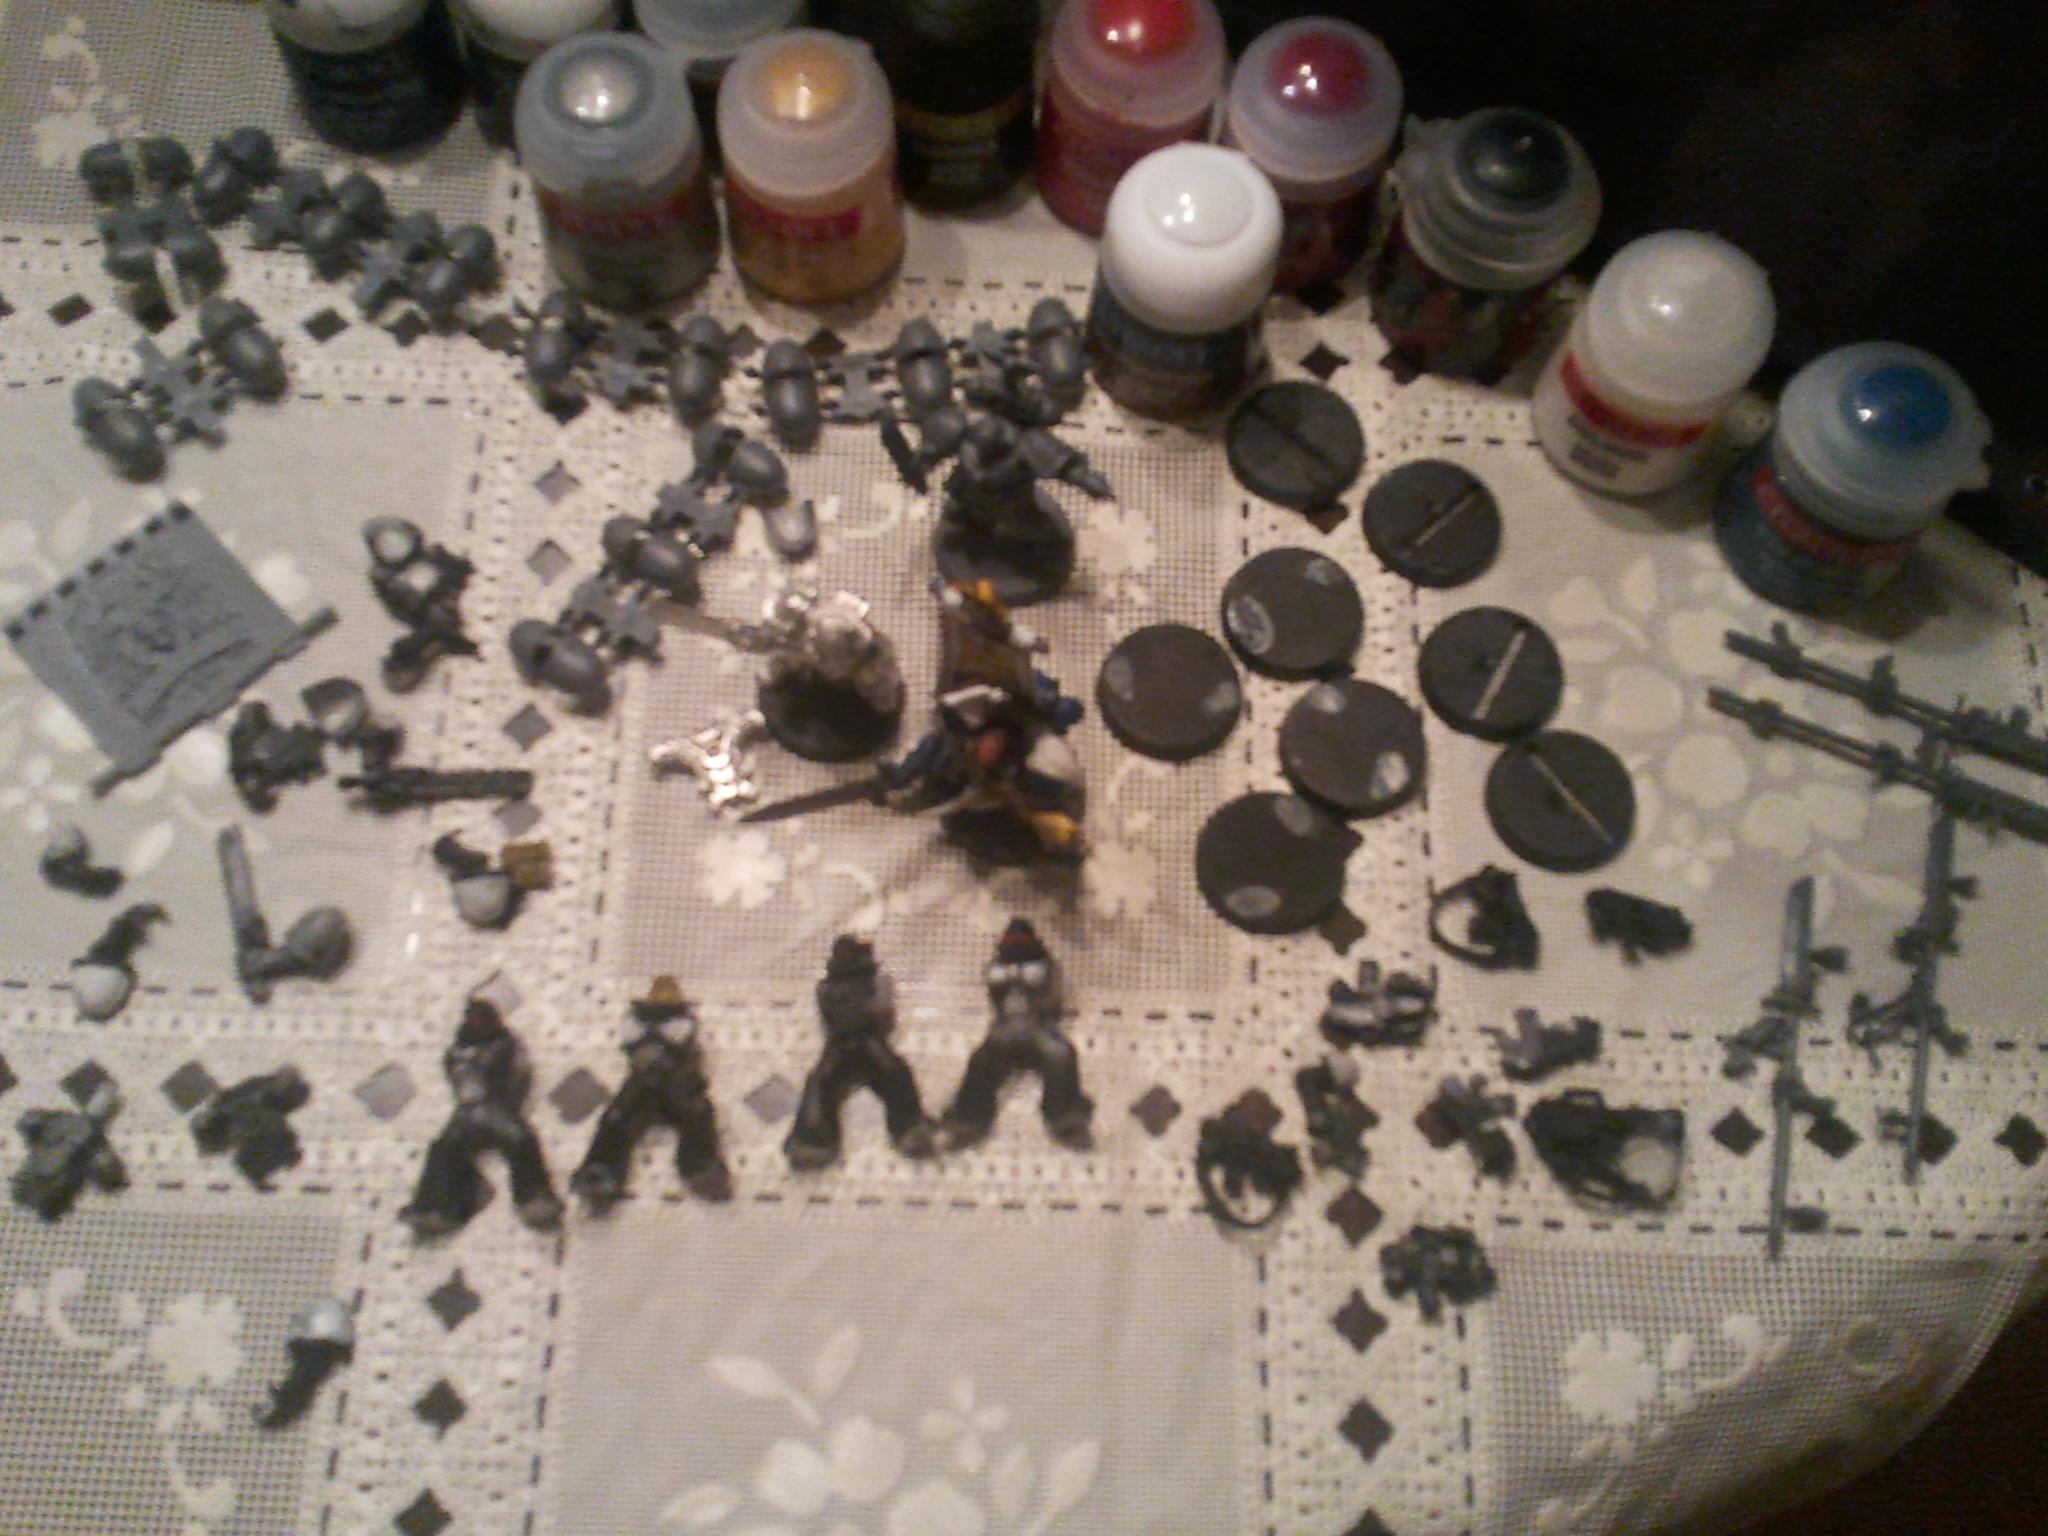 The lot of Black Templars from ebay... need work